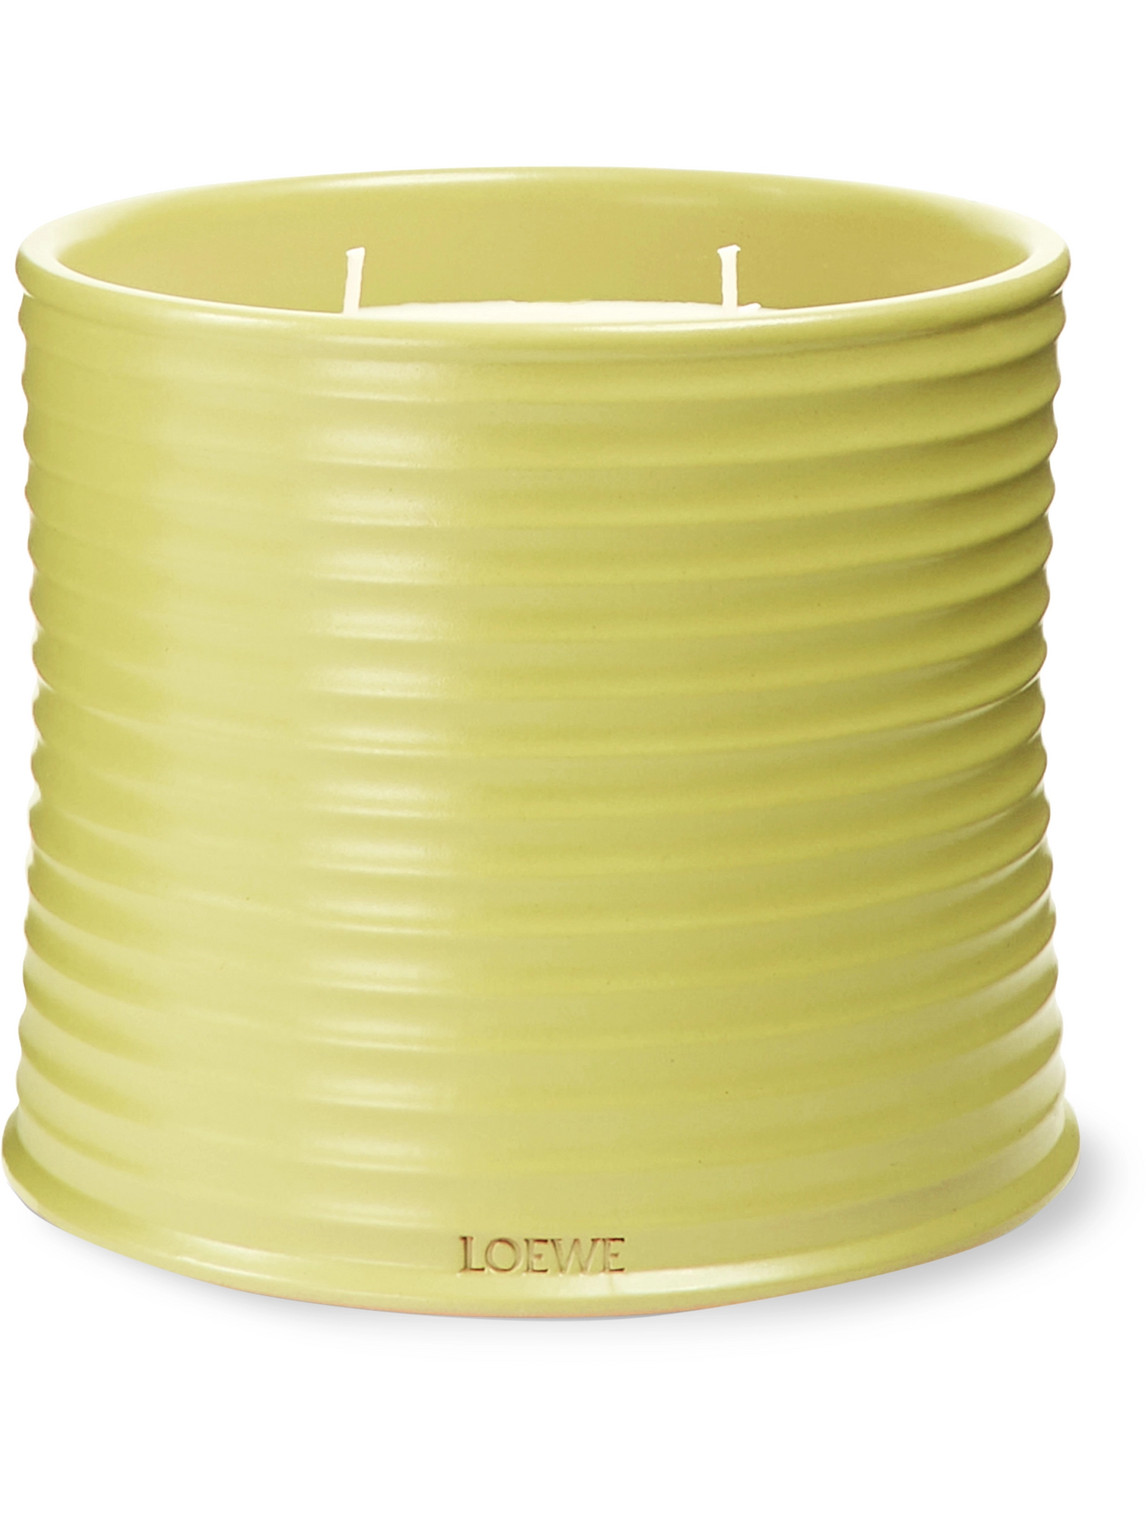 Loewe Home Scents Honeysuckle Scented Candle, 2120g In Colorless